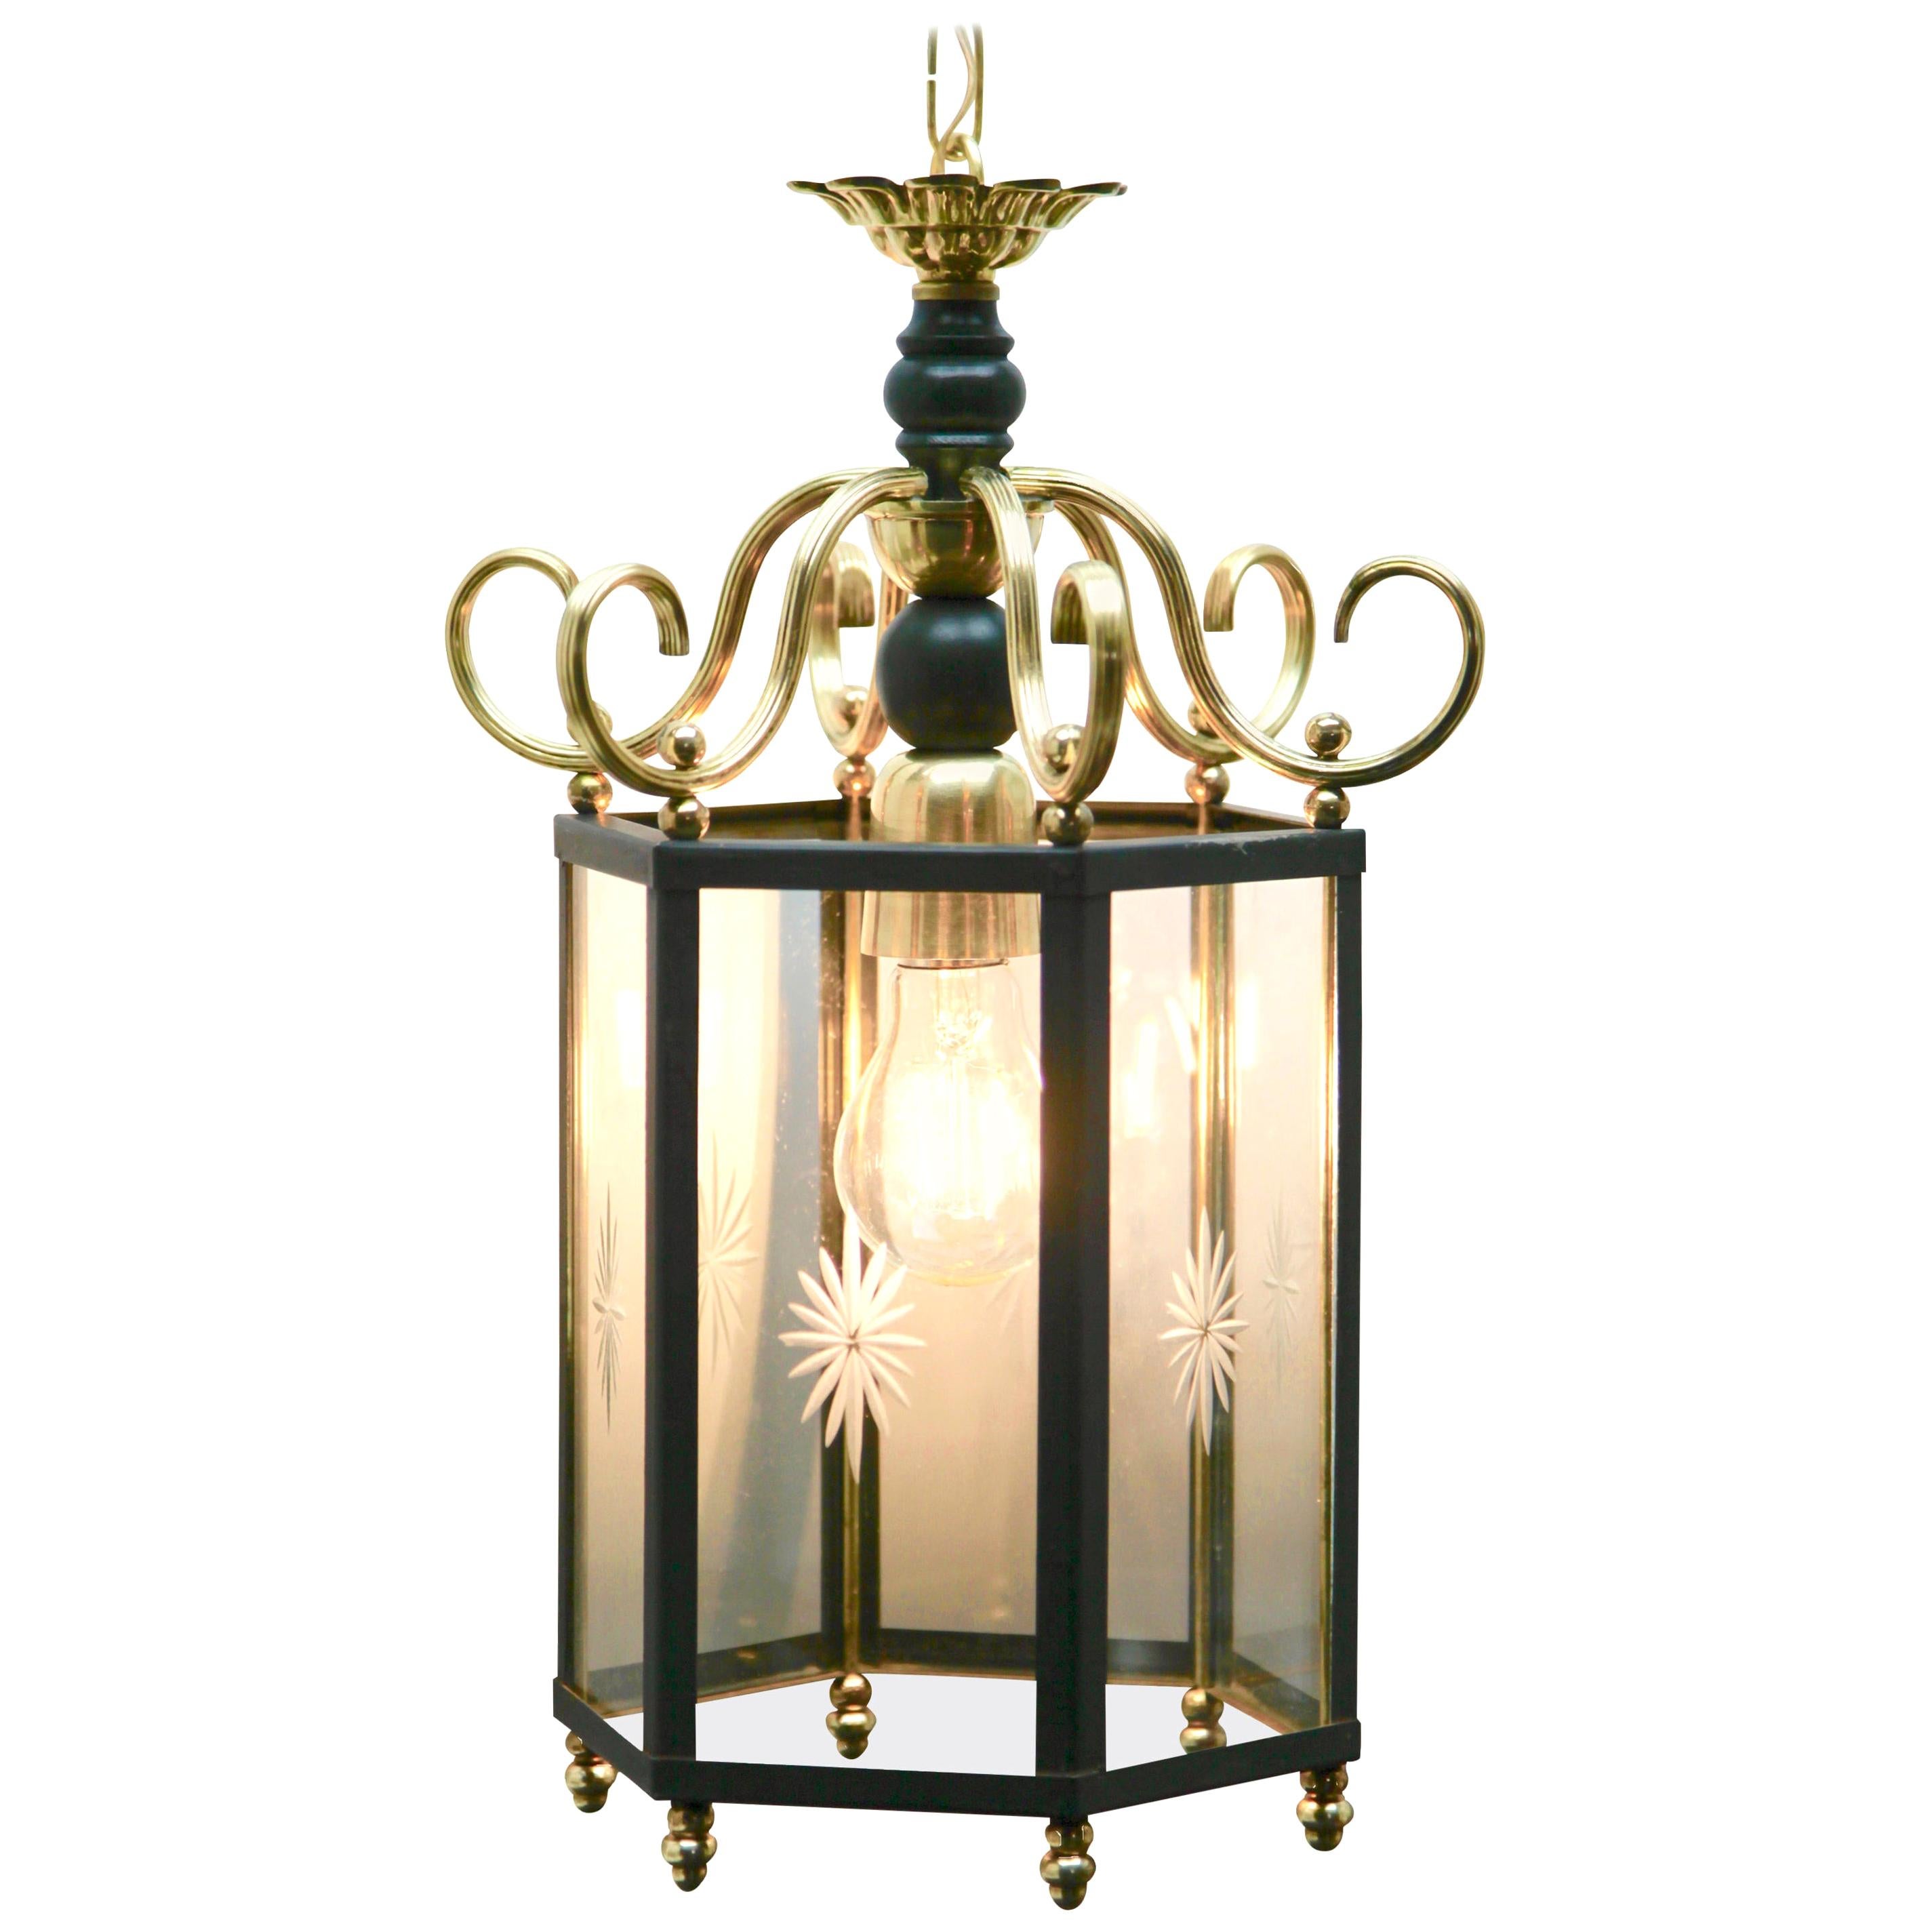 Early 20th century brass and etched glass lantern hall light; this Classic design will suit a wide range of interior period-styles.
Ife wanted there are 3 the same in stock.

The light has 6 clear glass panels, each one etched with a starburst